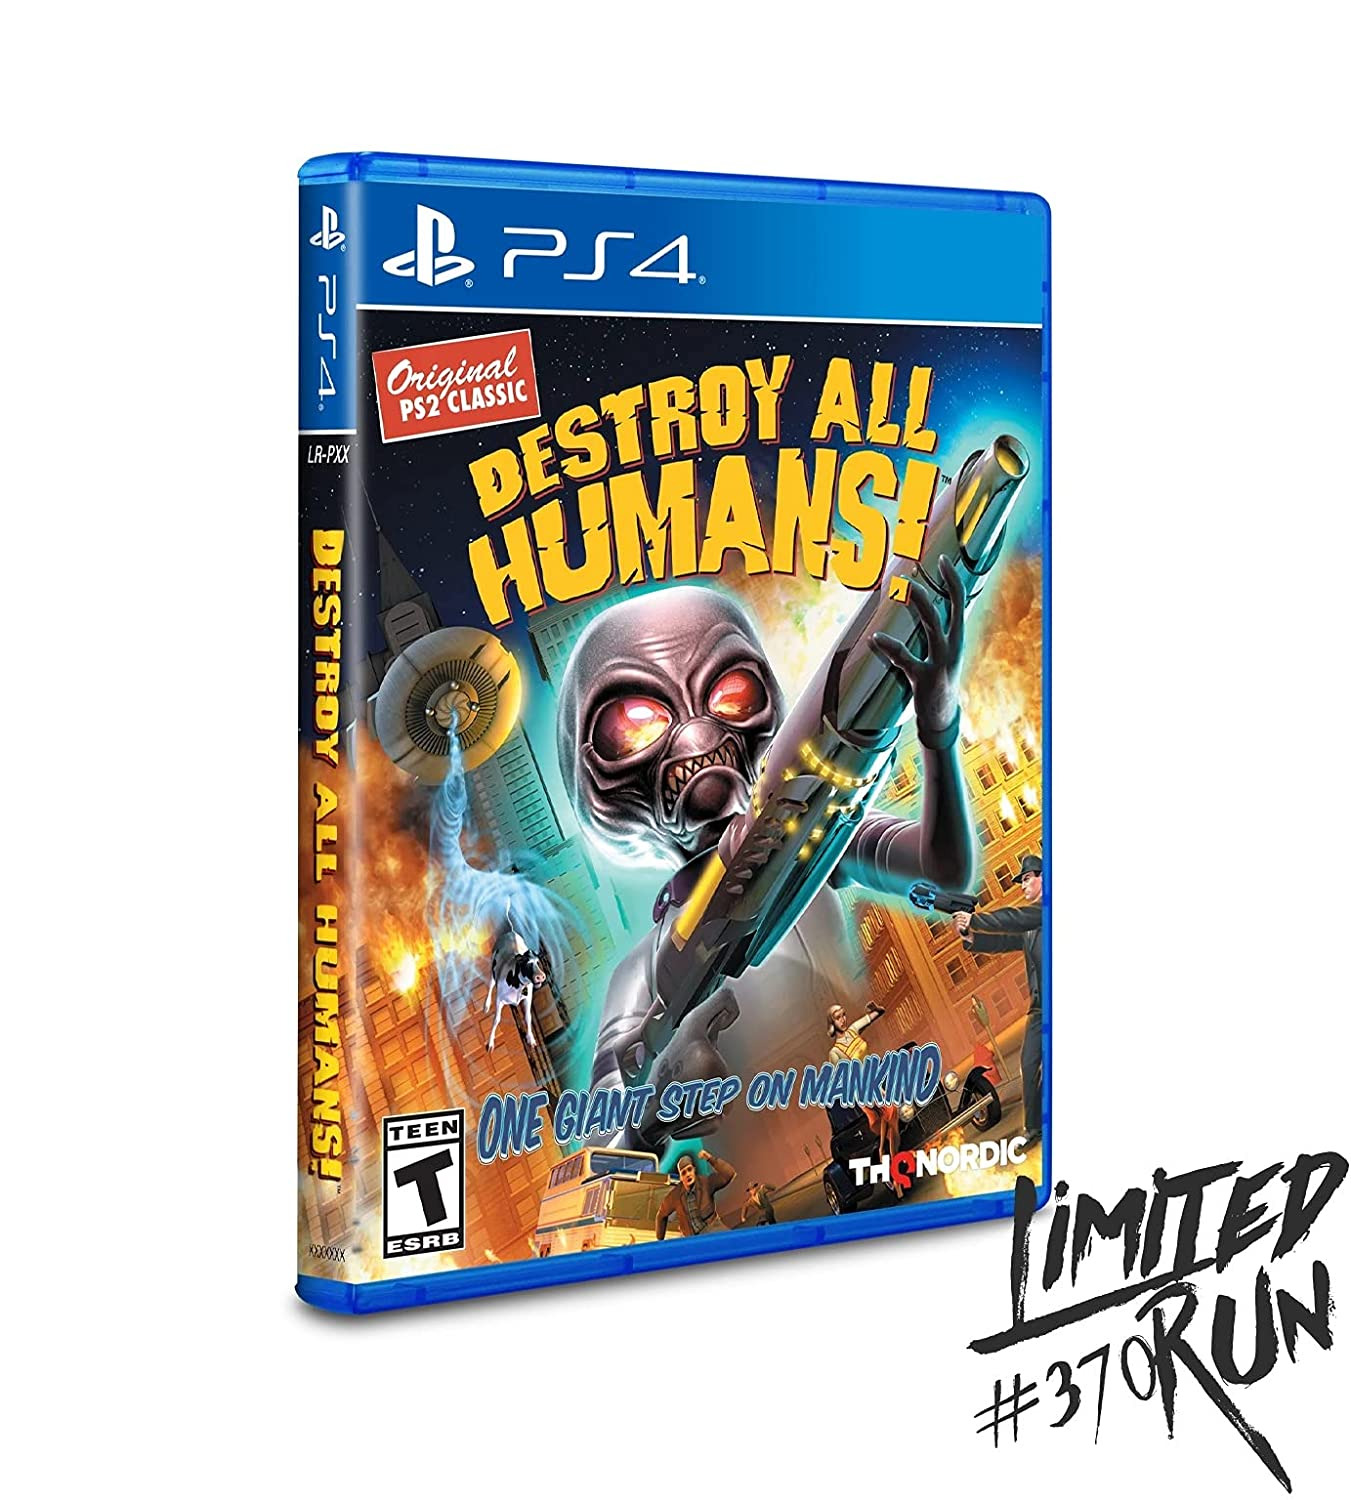 Destroy All Humans - PS2 Classic Limited Run Games #370 PlayStation 4 Sealed